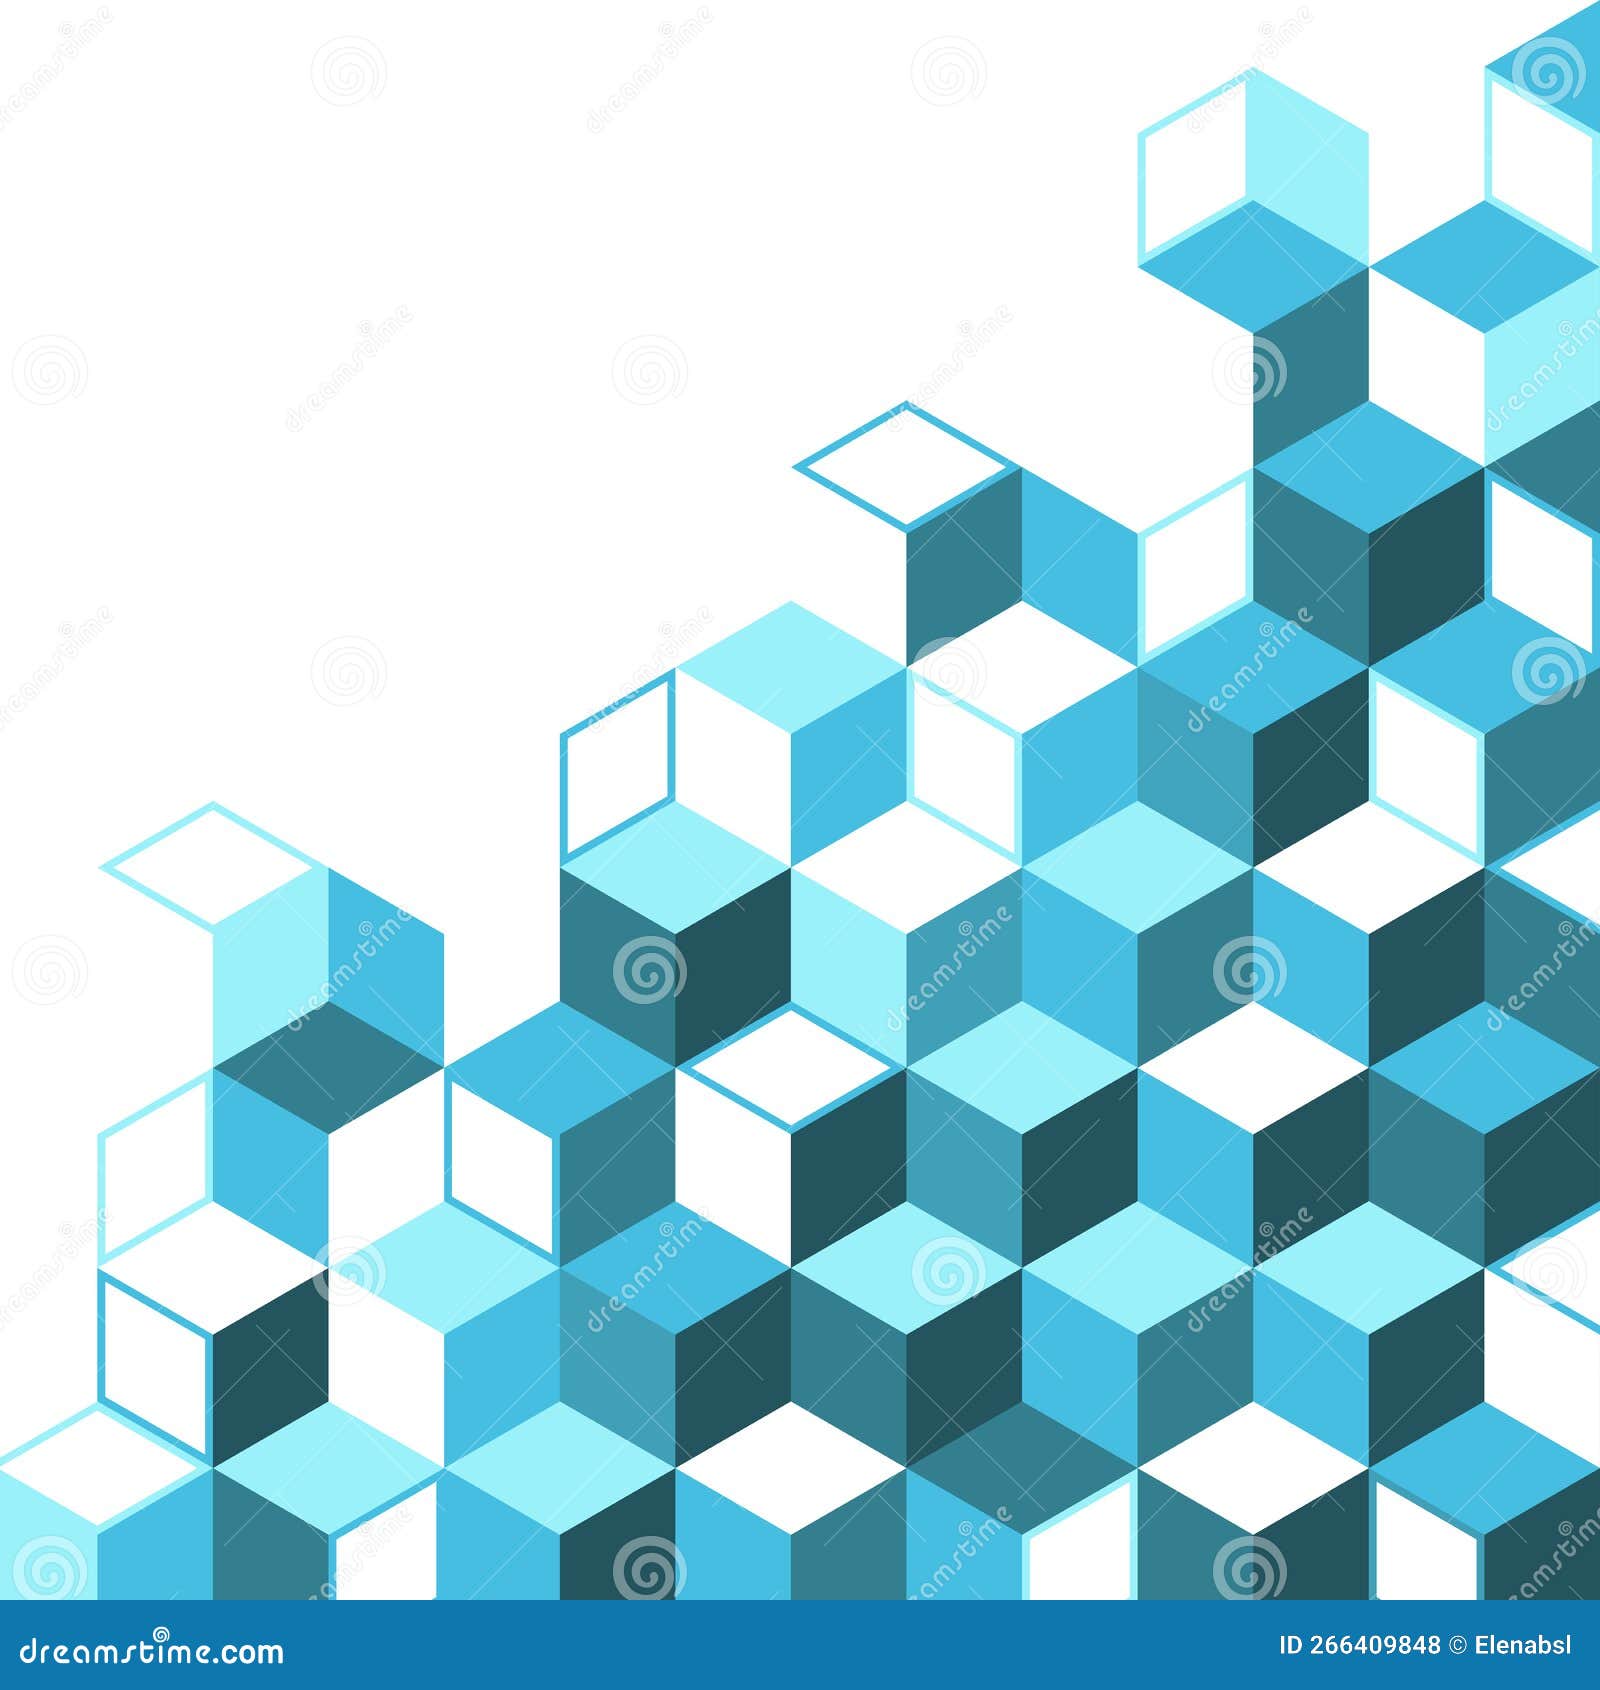 tridimensional blocks pattern background with copy space